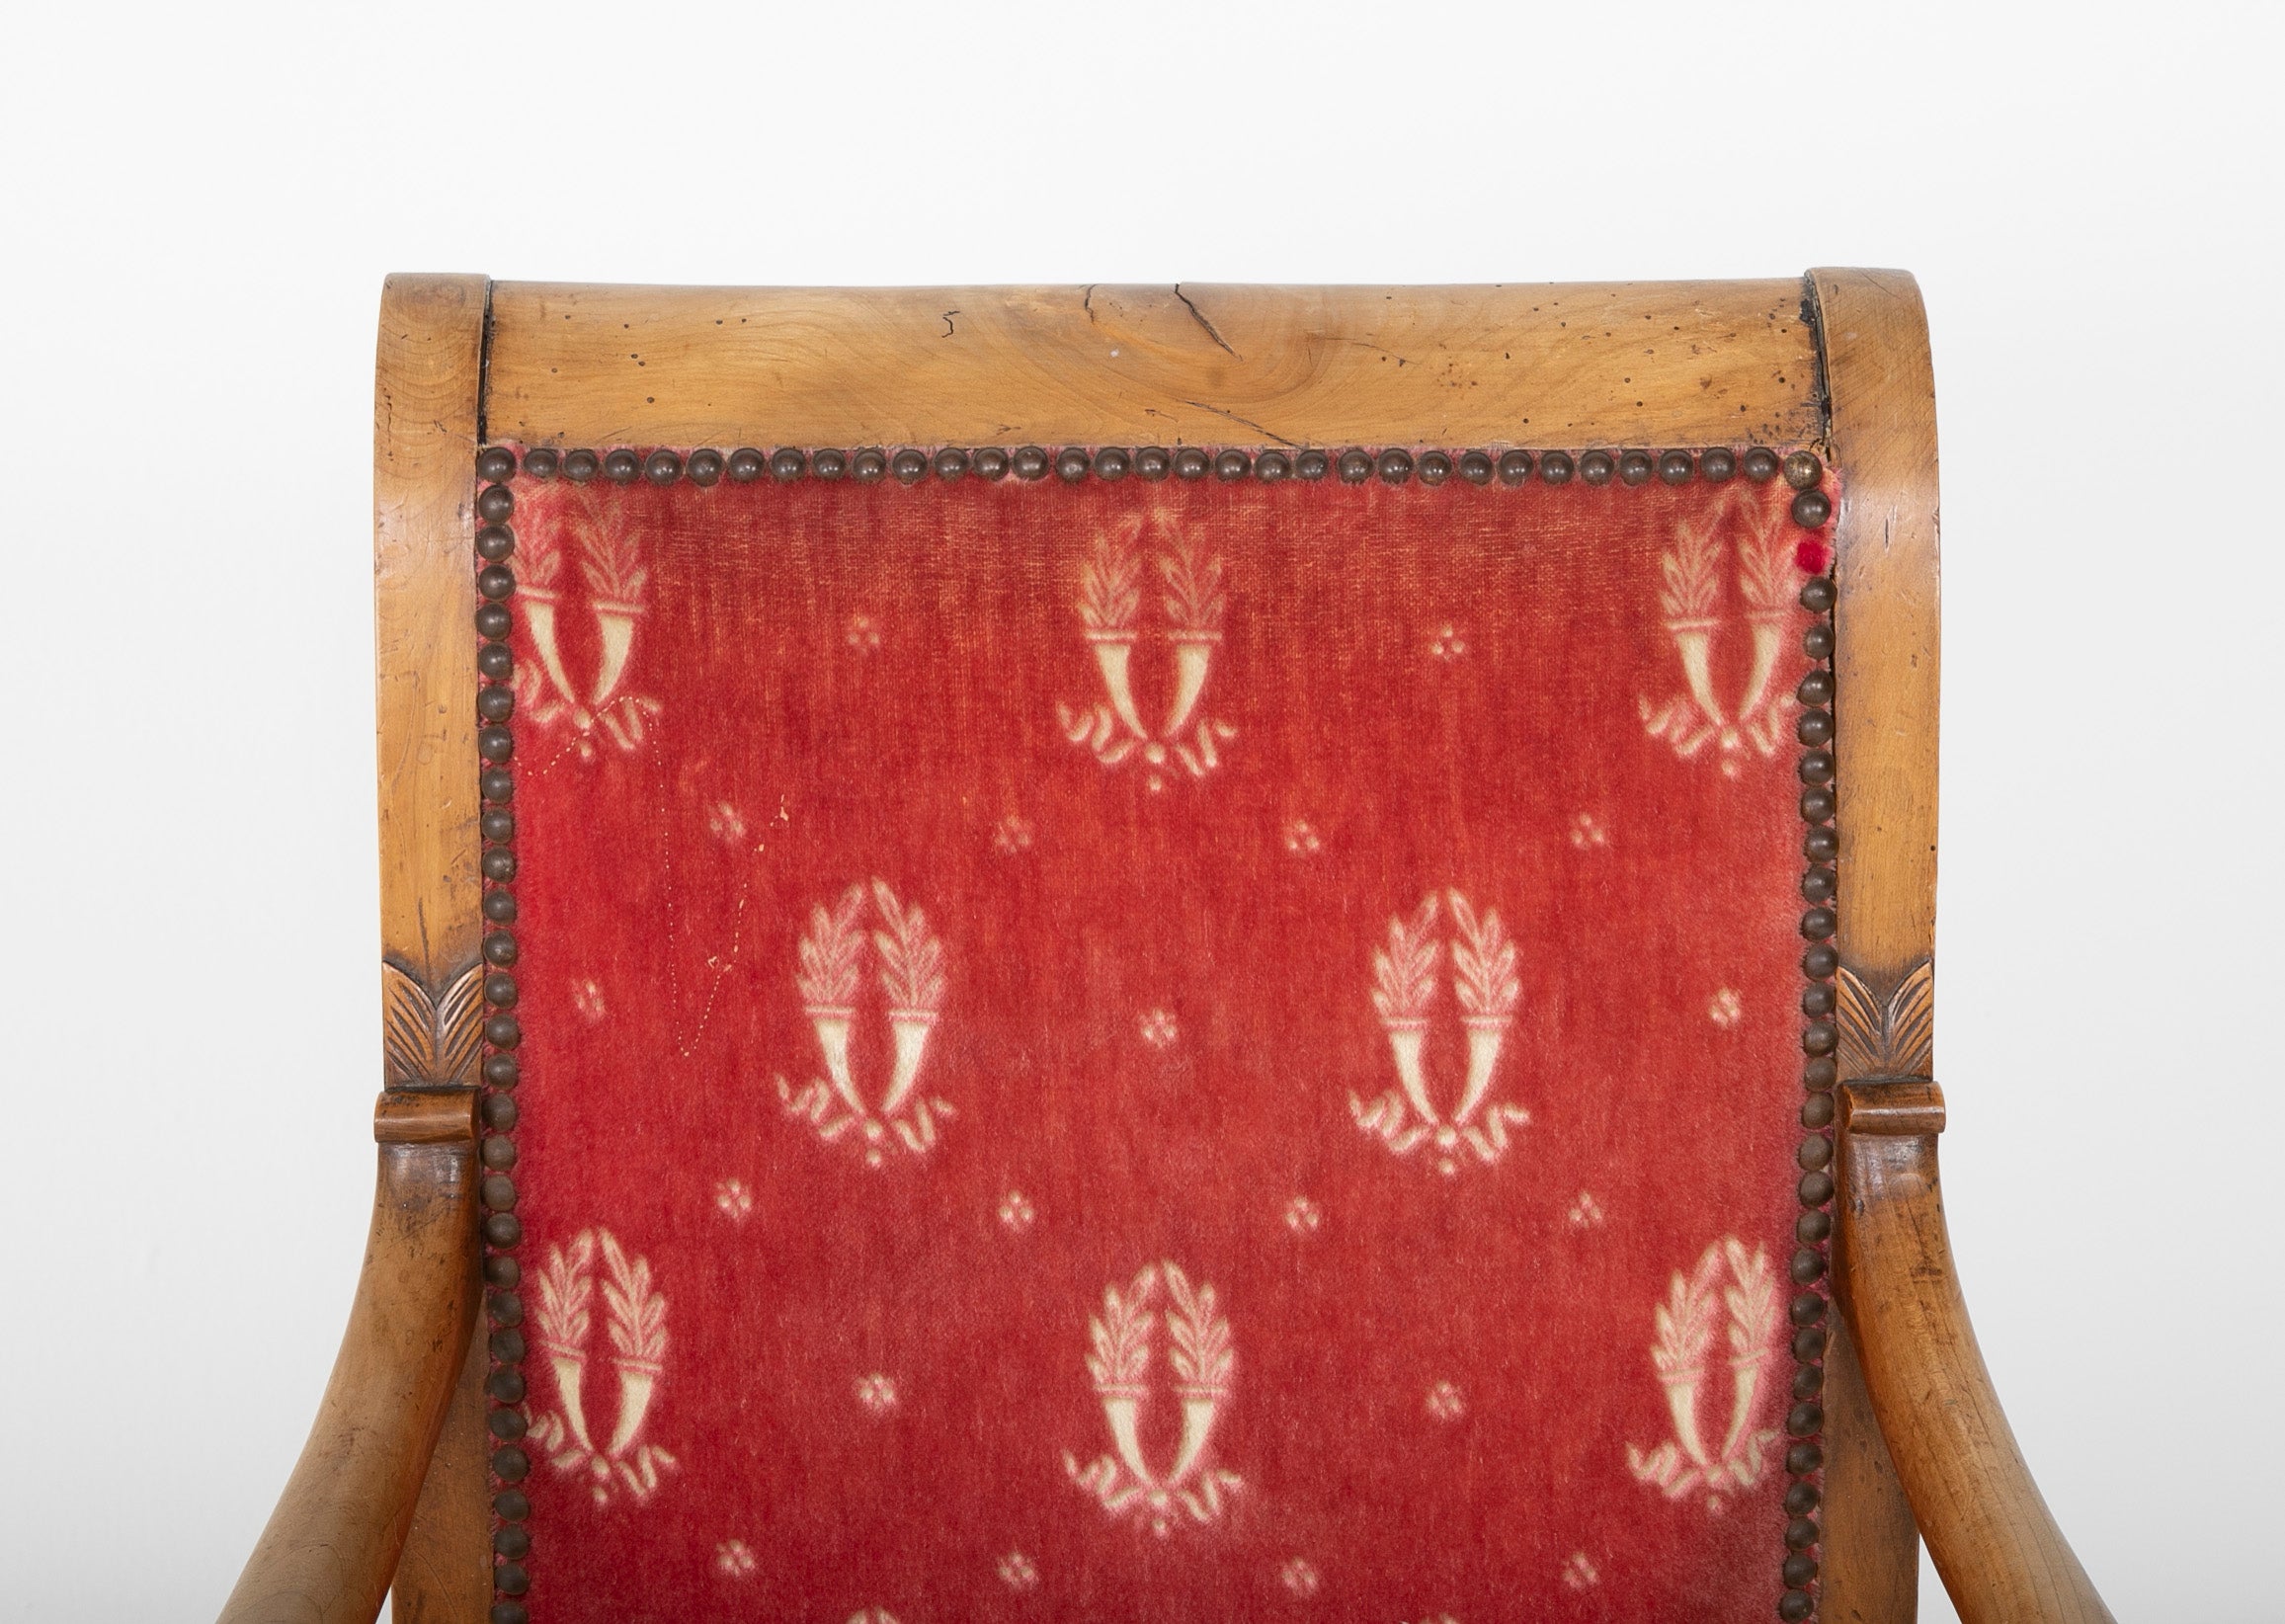 Early 19th Century Charles X Fauteuil